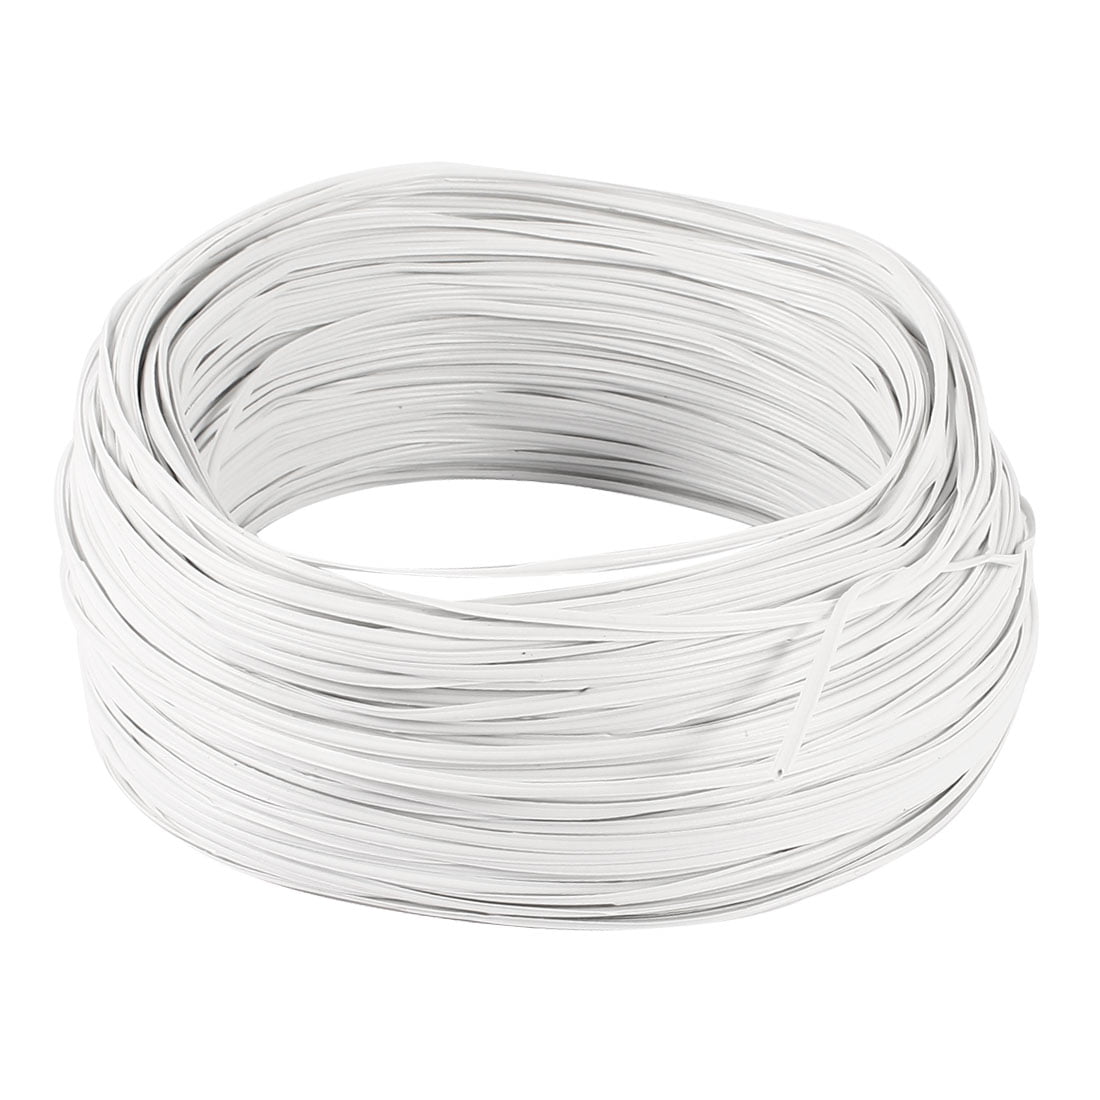 White PVC Coated tension wire Ø 4 mm Thick and malleable - Buy online on